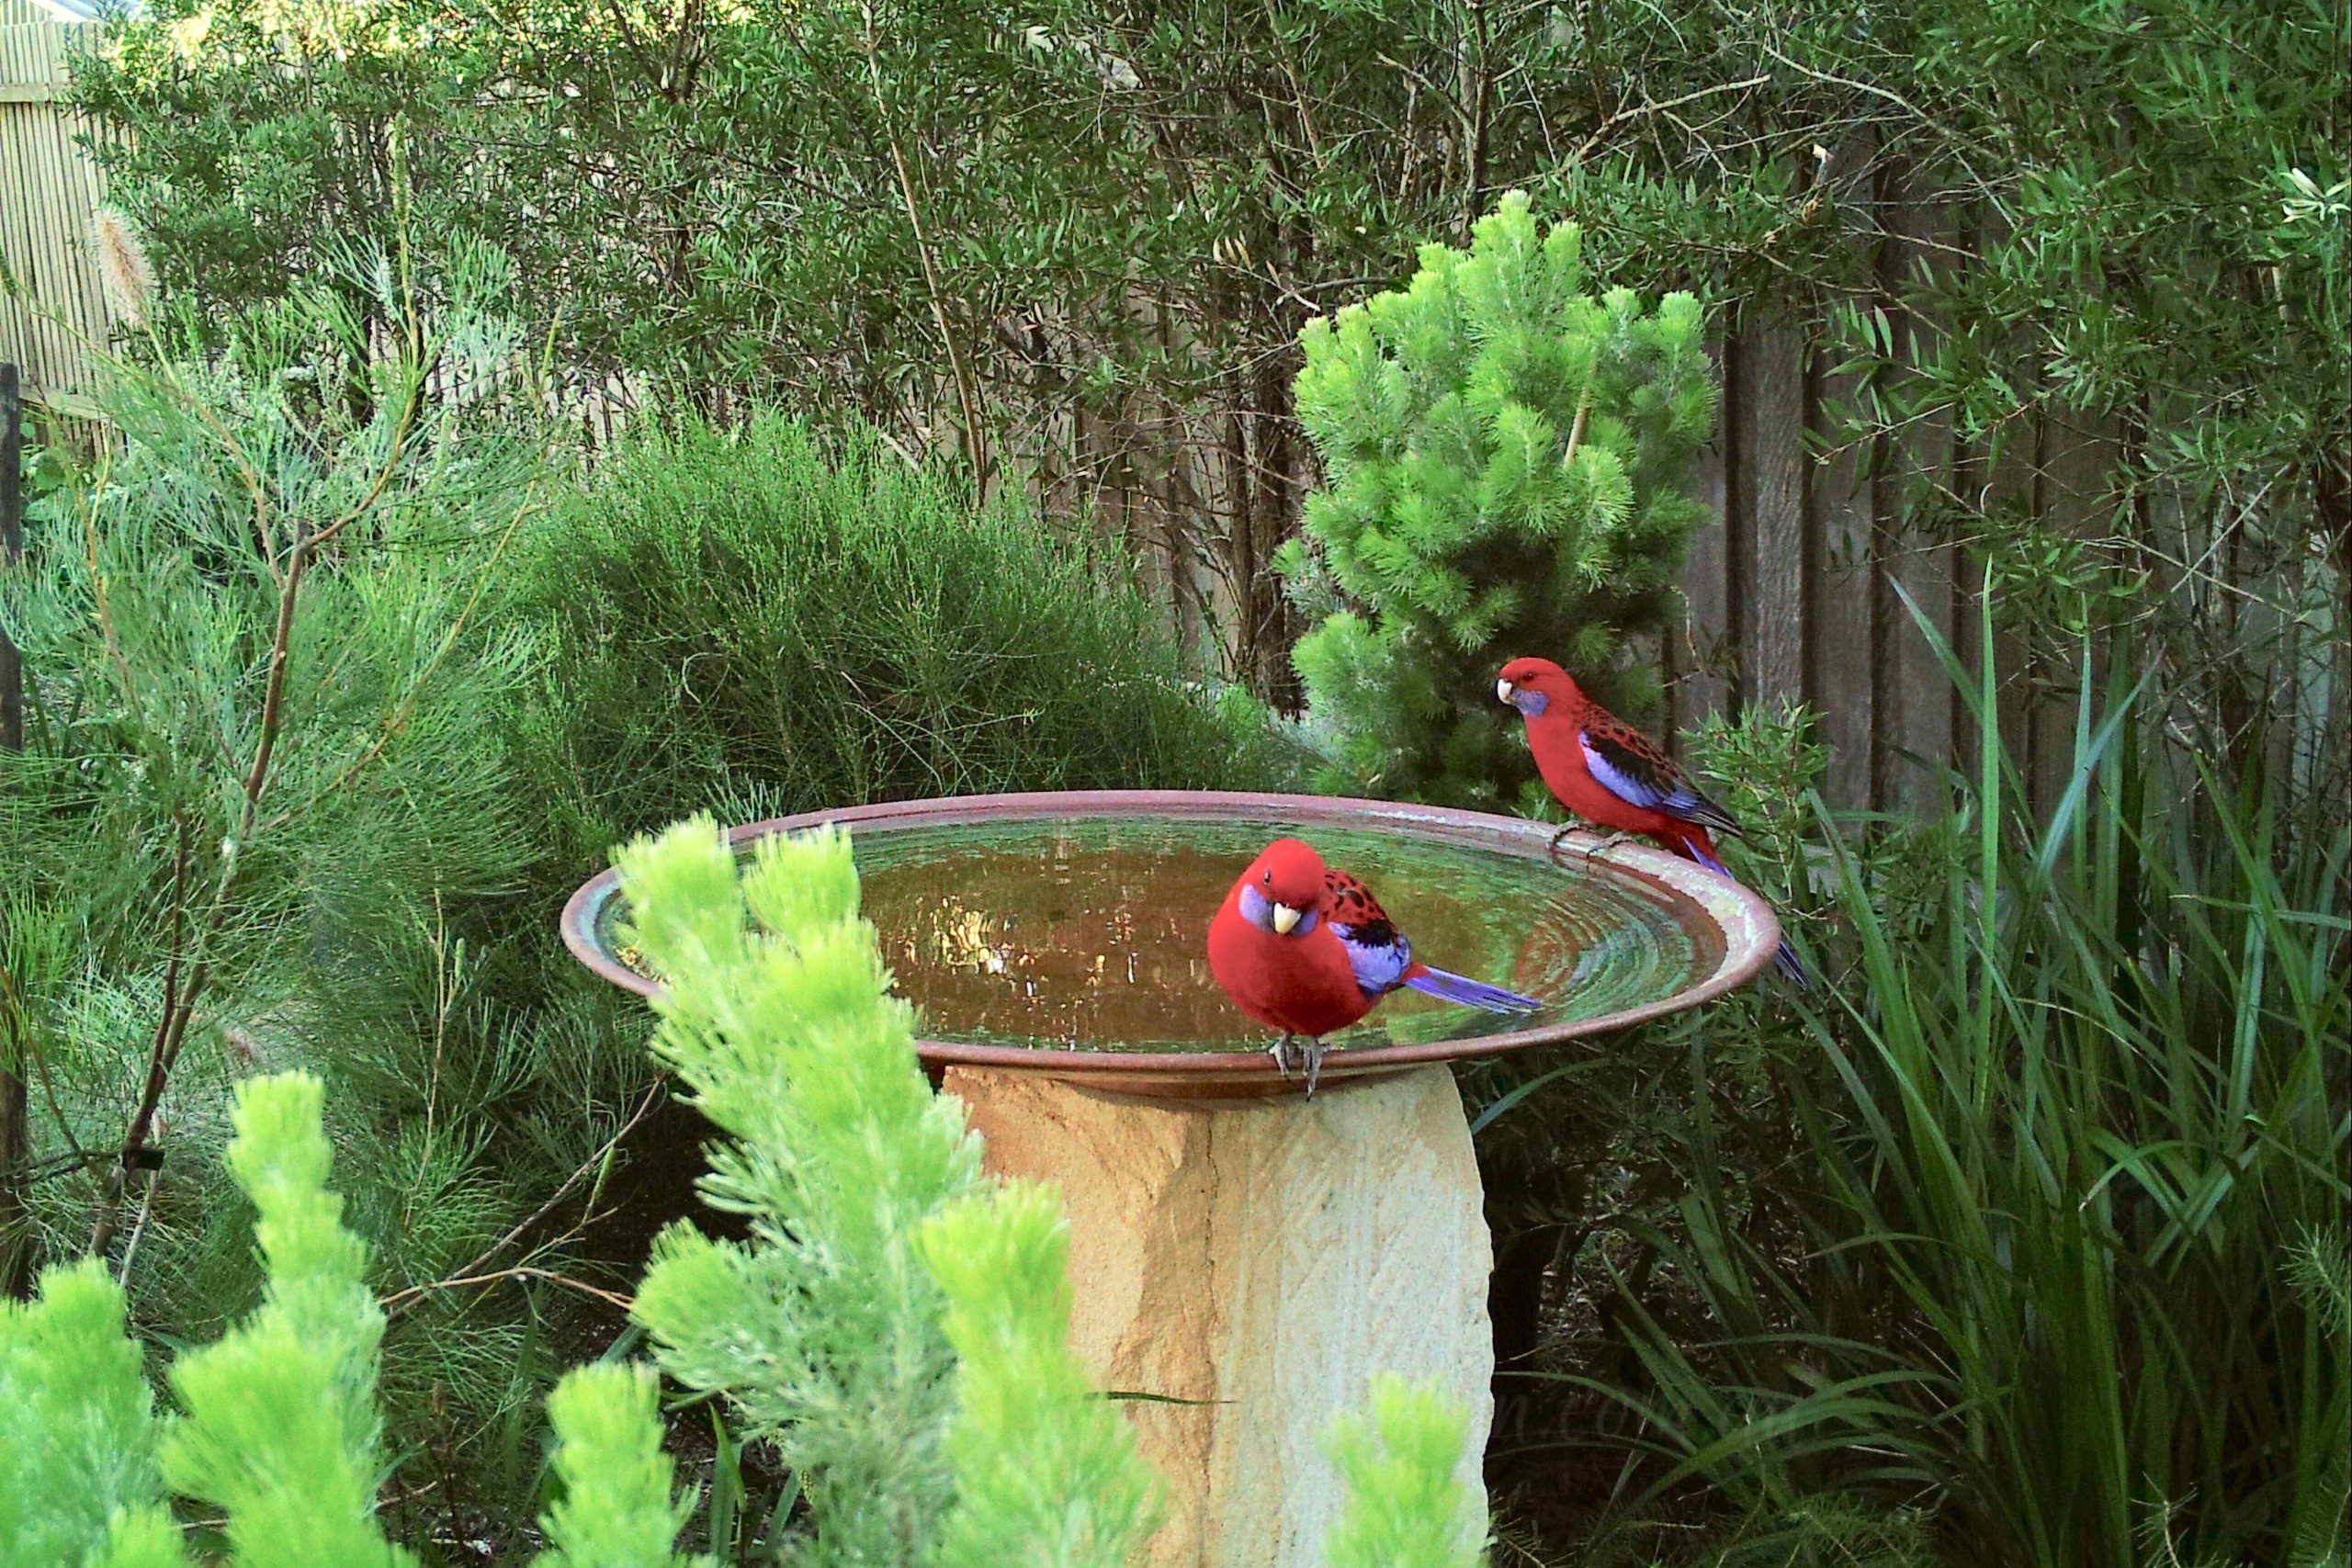 Why are birds not visiting my bird bath?